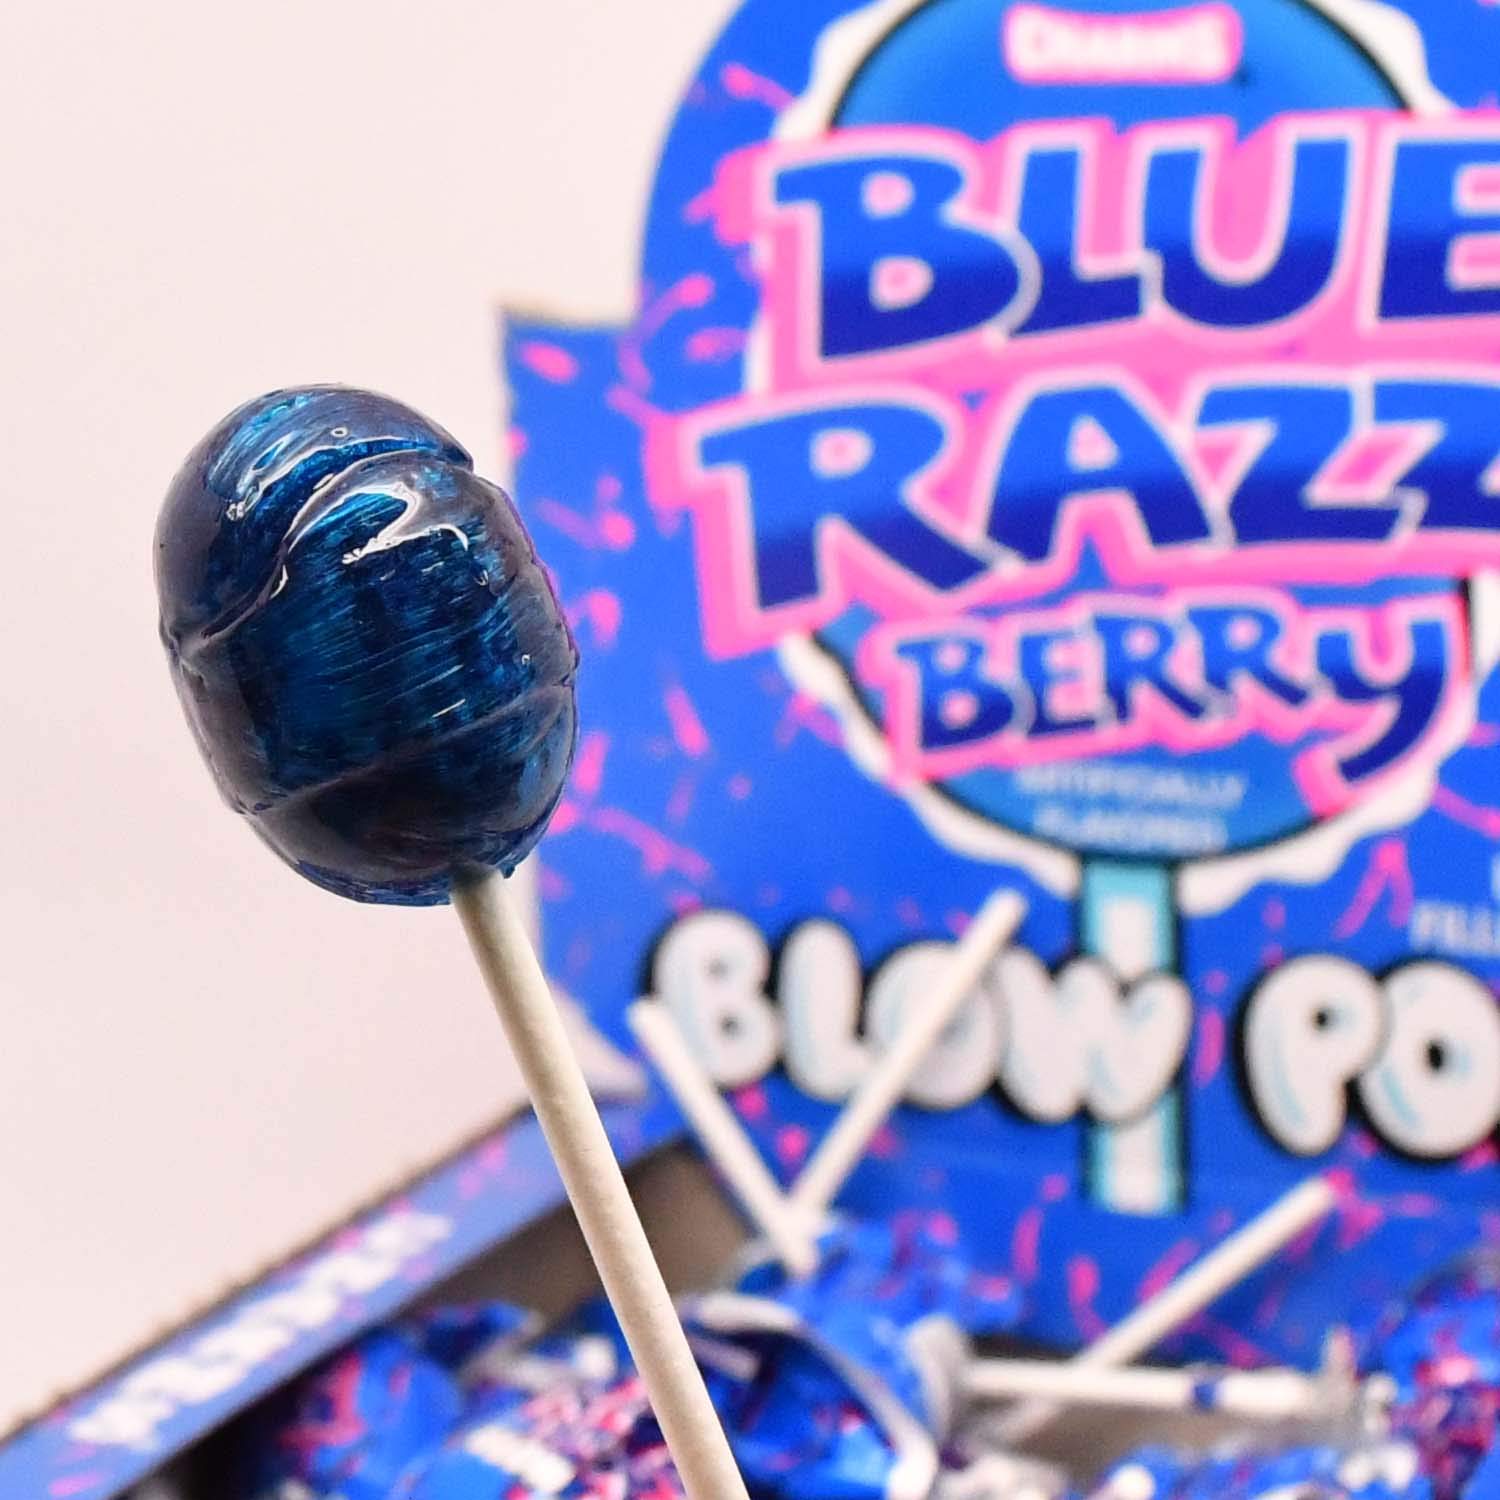 The Best Lollies to Enjoy on Official Lollipop Day